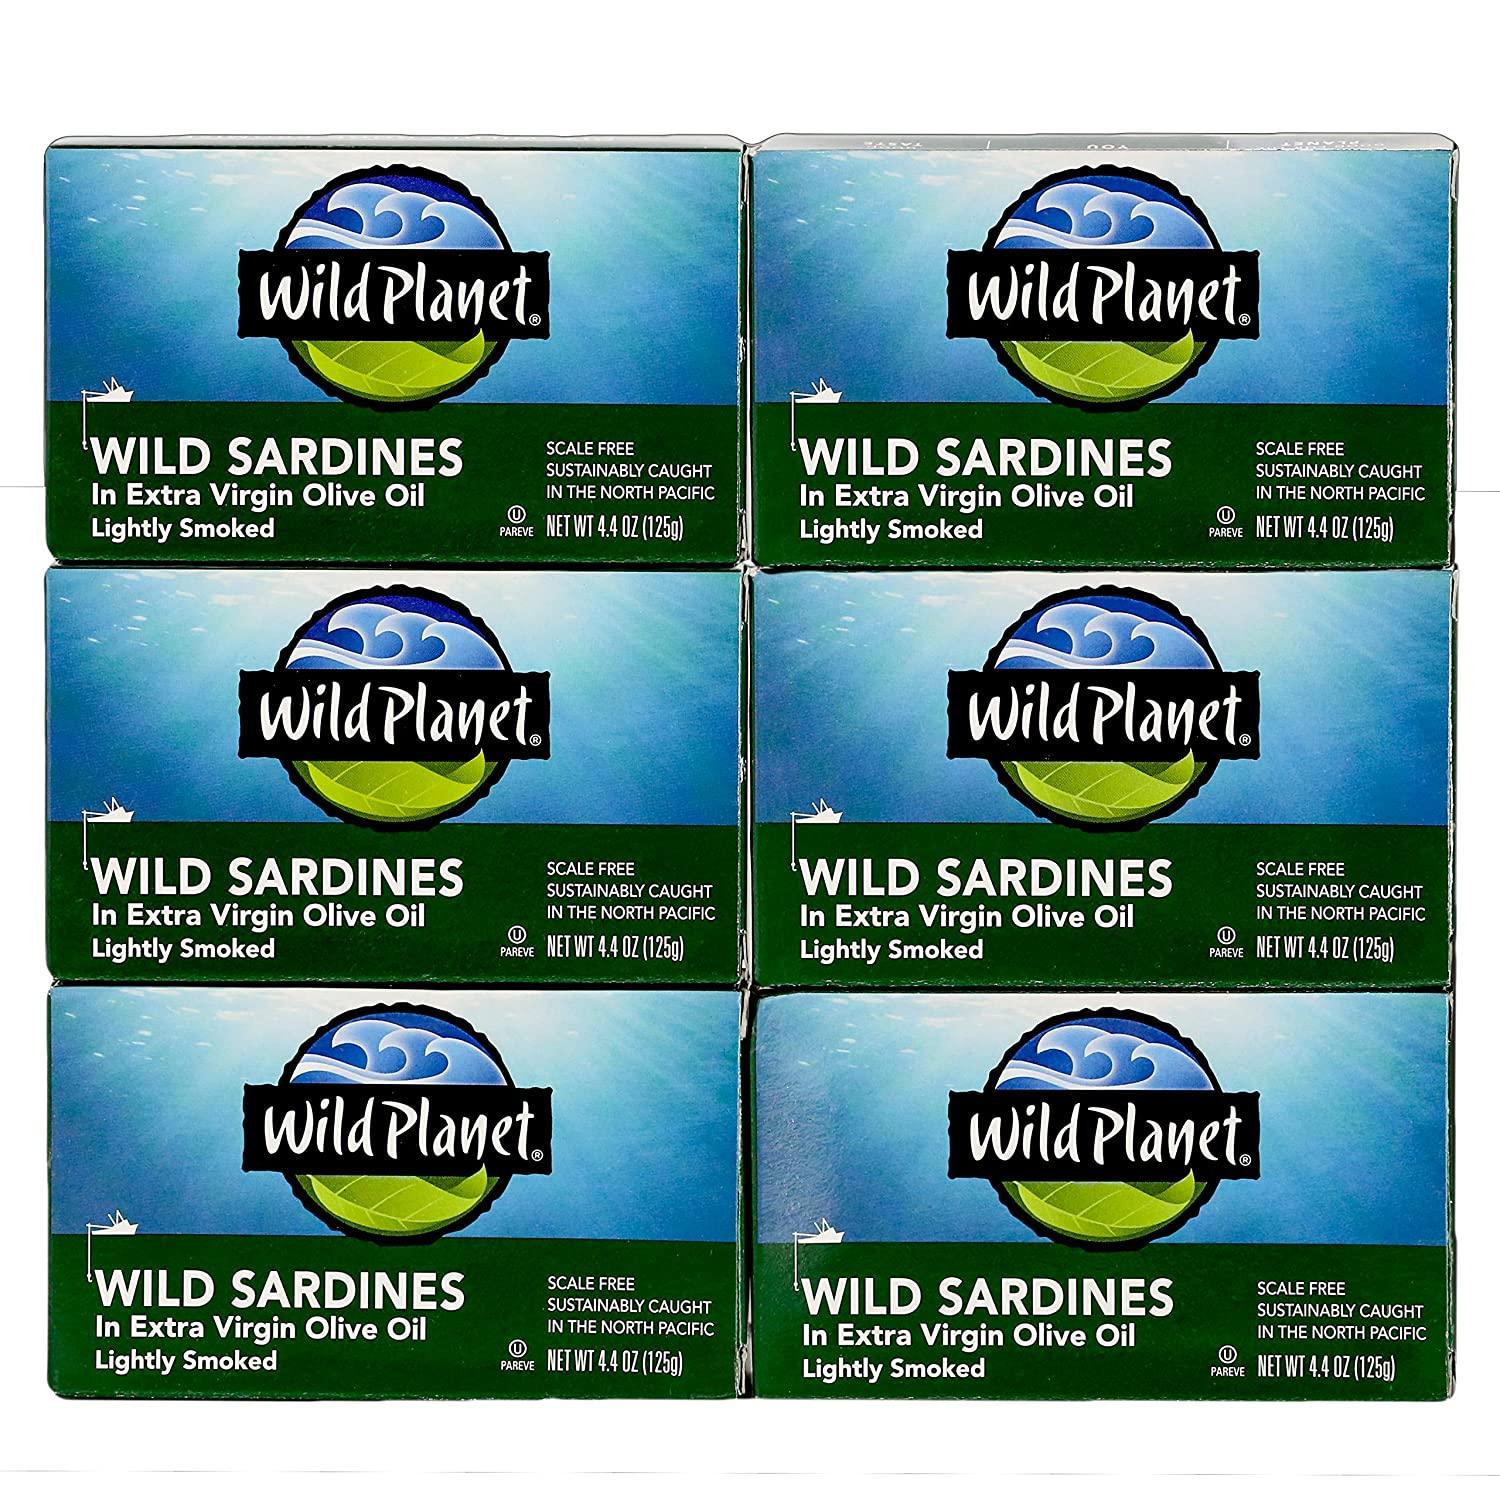 Wild Planet Wild Sardines In Extra Virgin Olive Oil 6 Pack for $8.27 Shipped